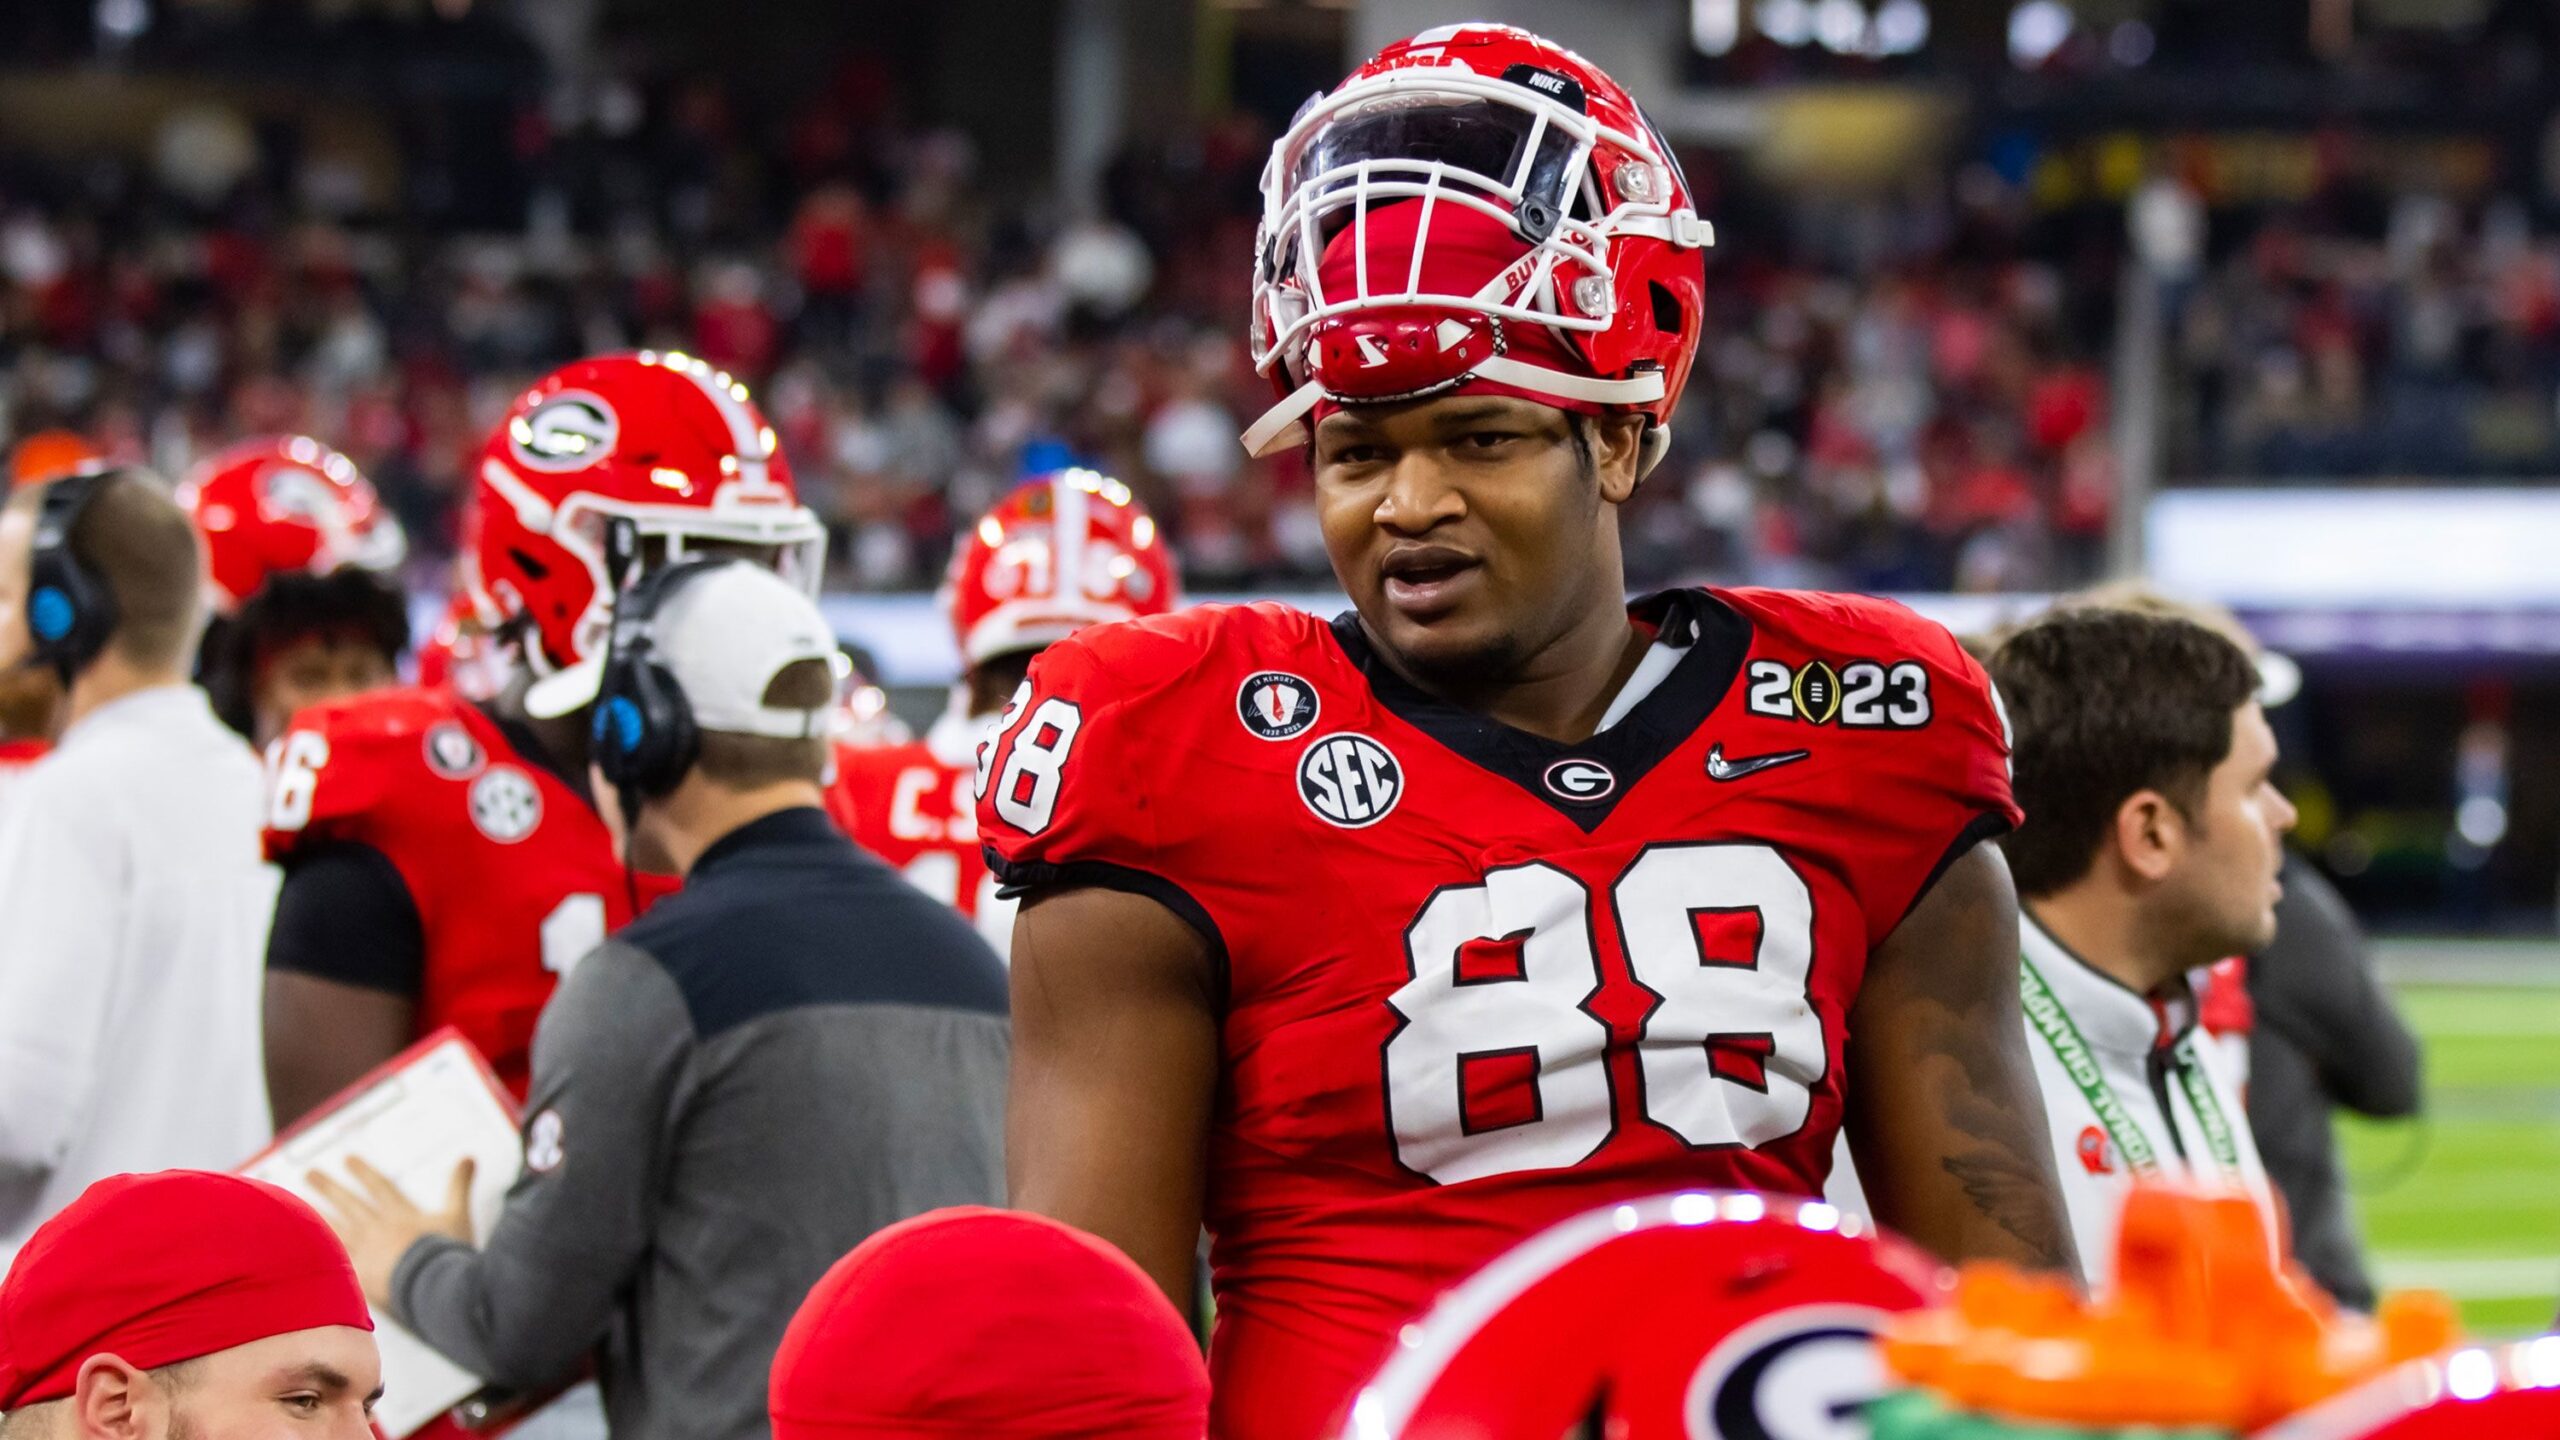 Georgia LB Arrested After Racing Incident; Teammate Also Detained Post-Crash